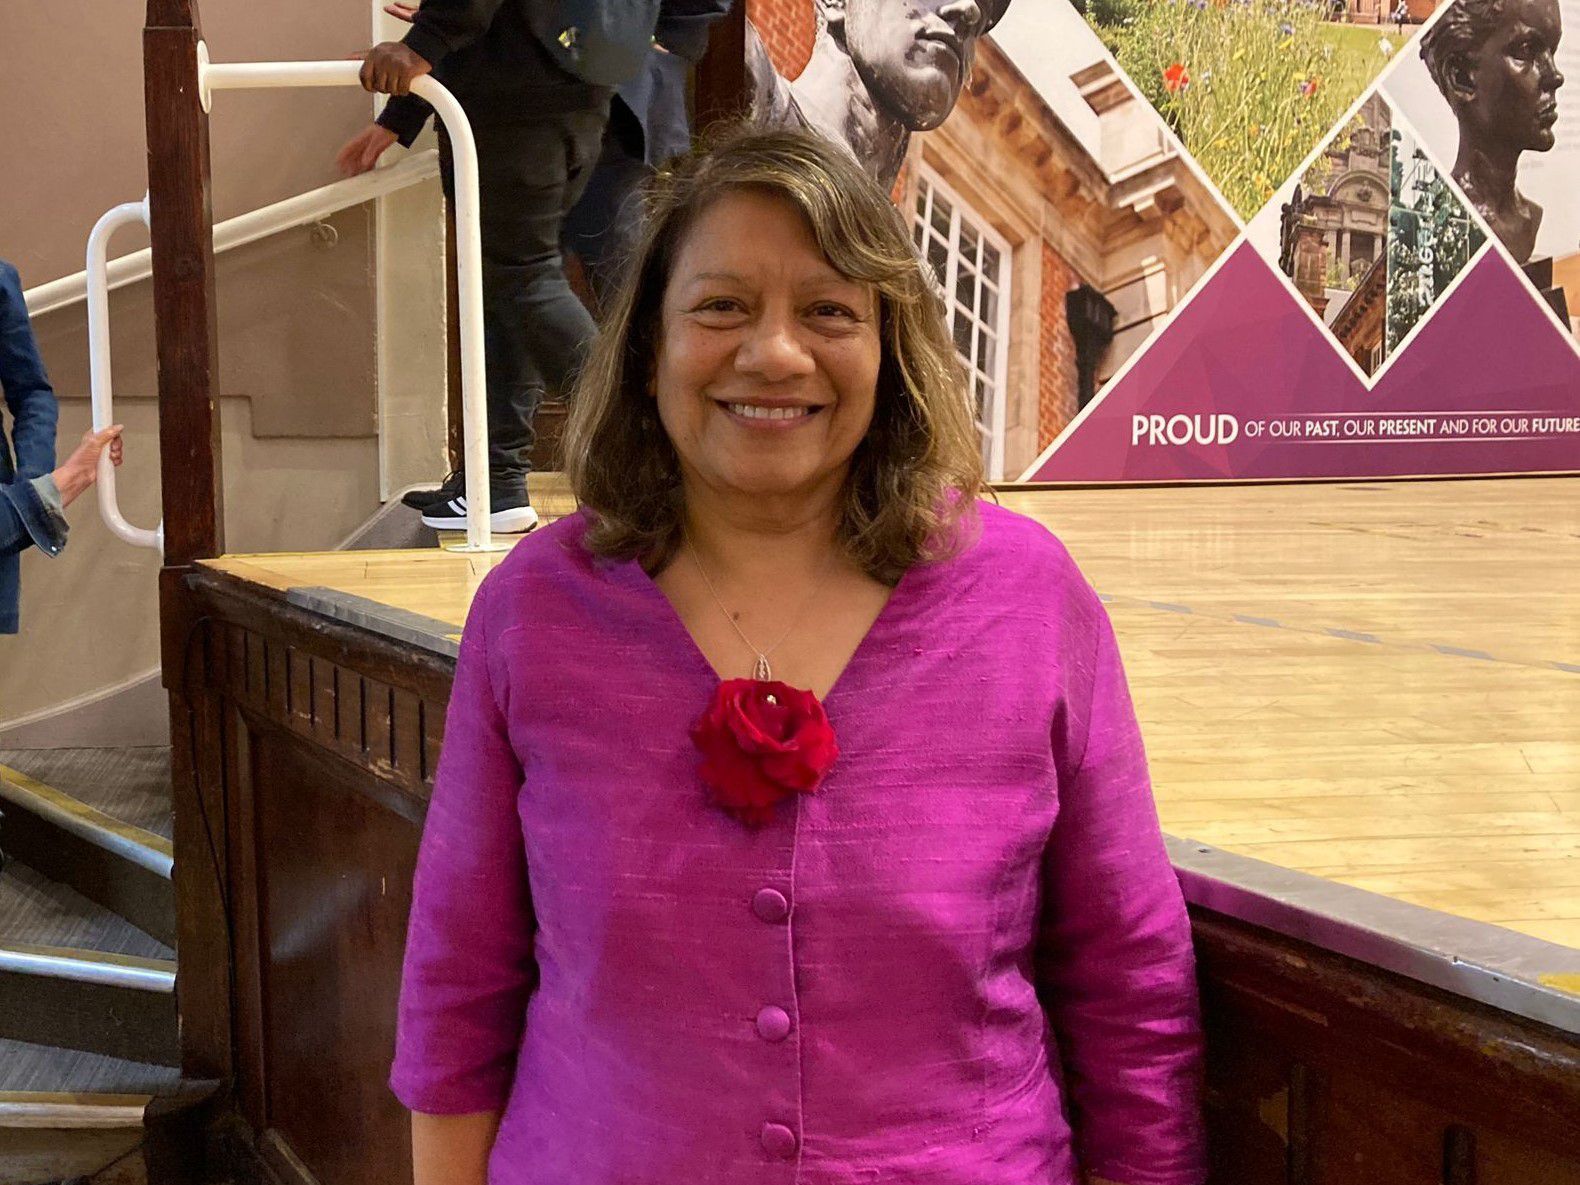 Who is Valerie Vaz, the new MP for Walsall and Bloxwich?